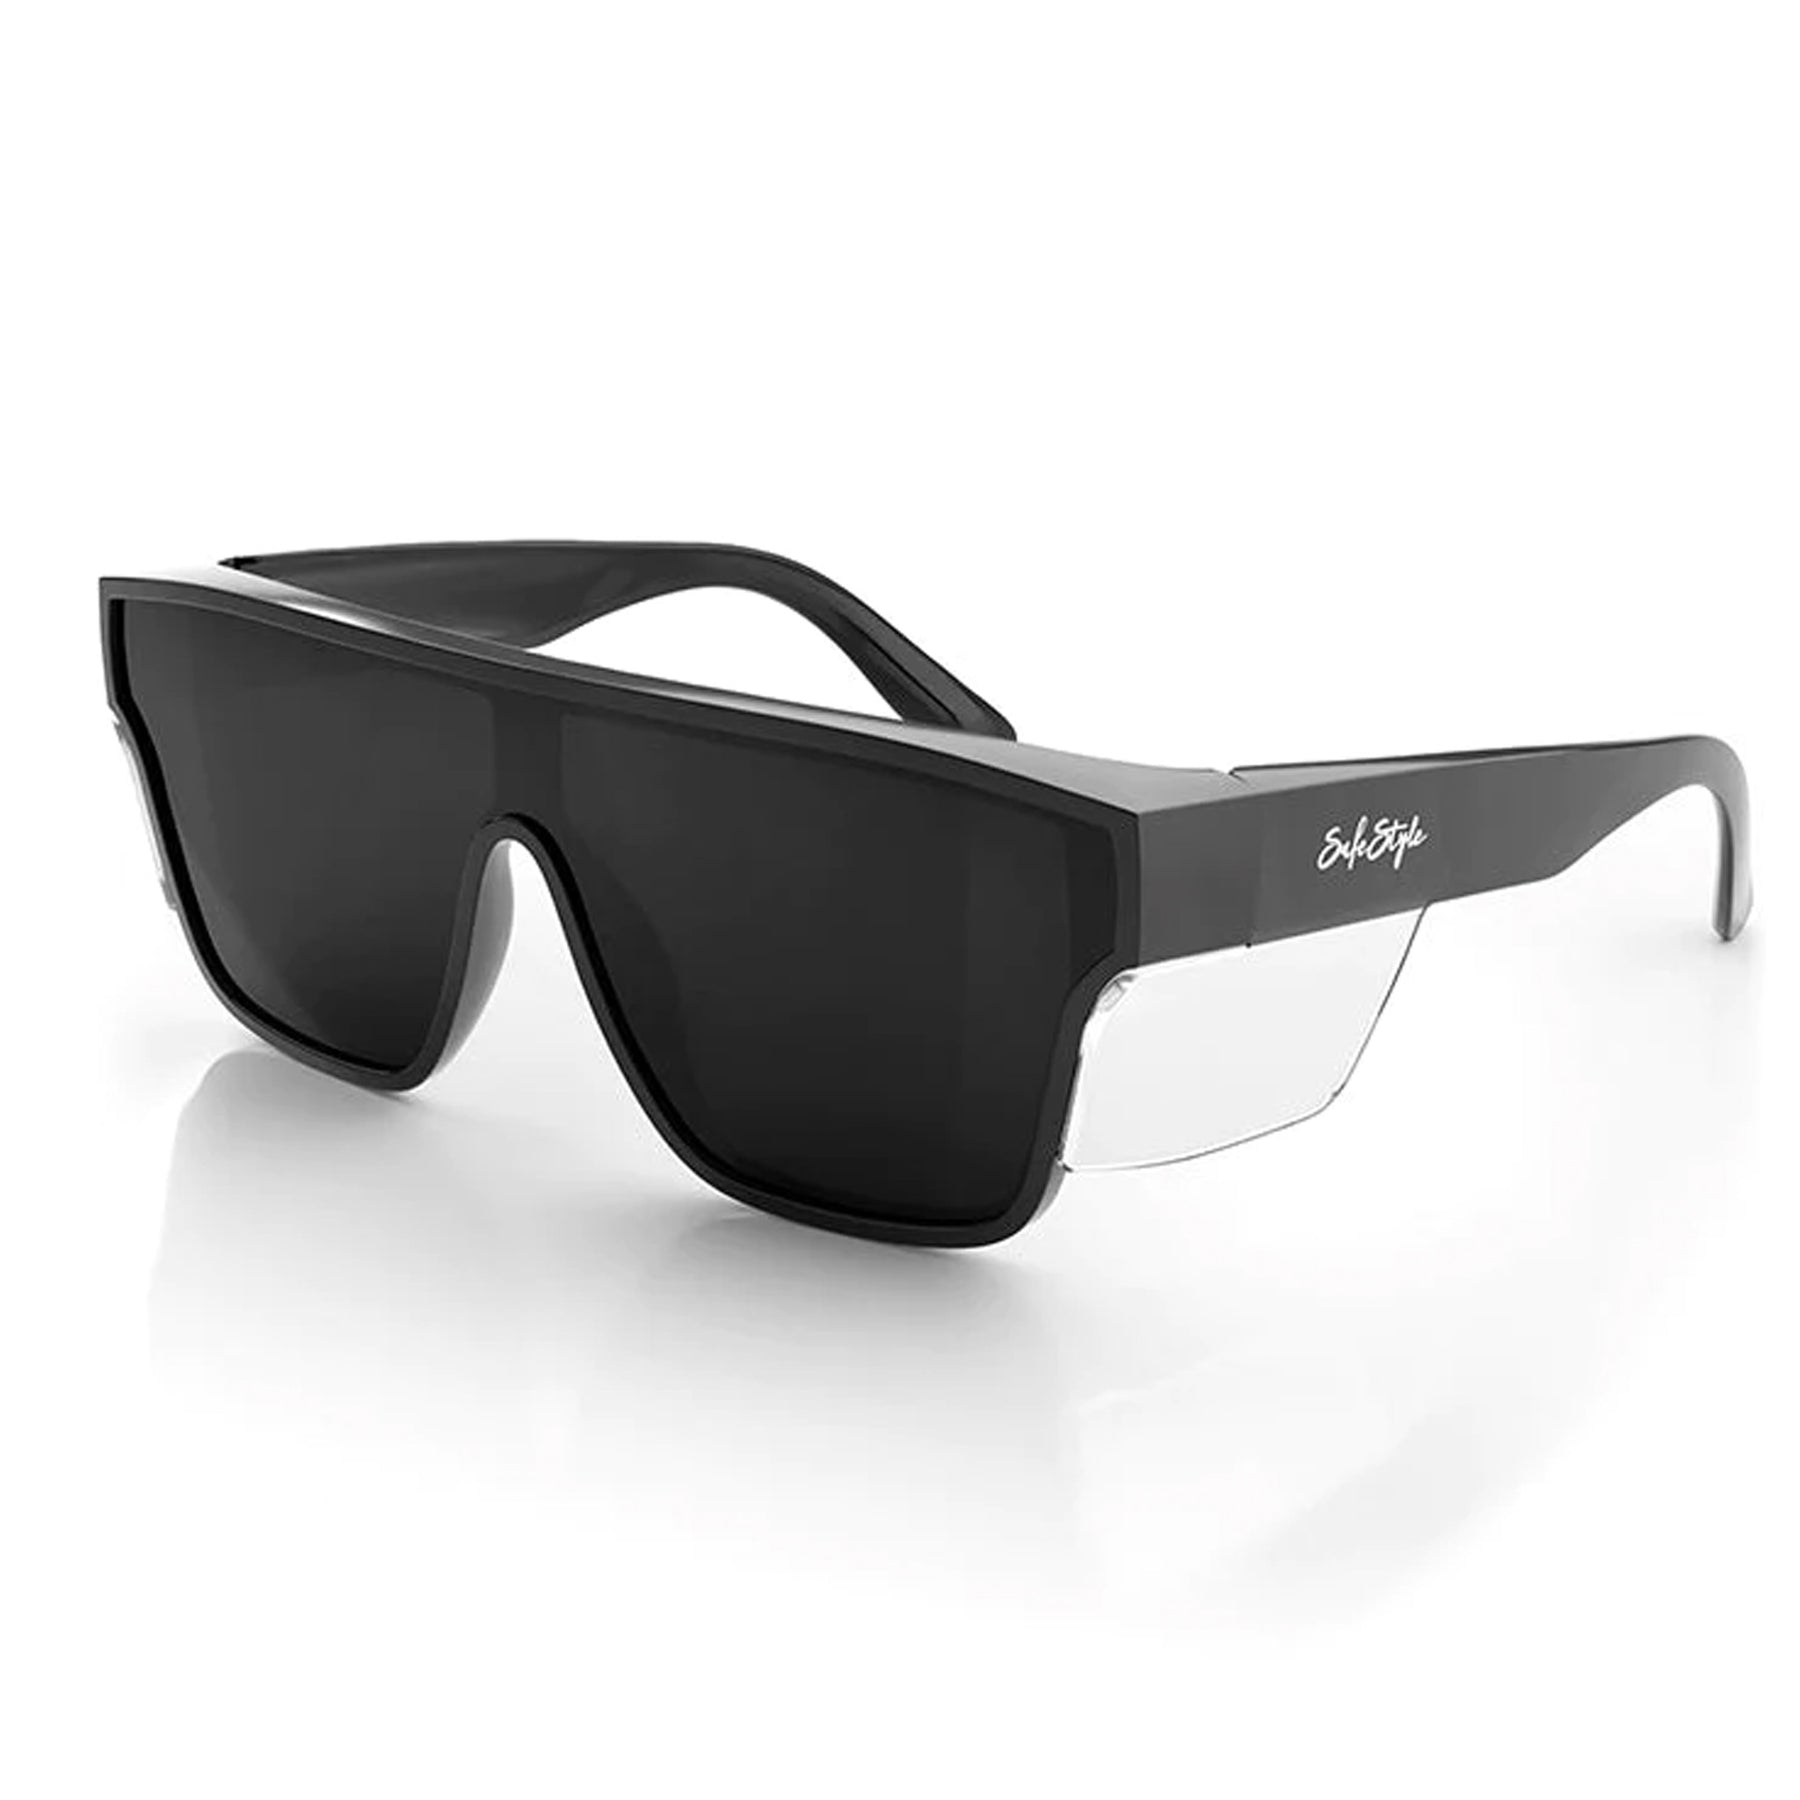 safestyle primes black frame with tinted glasses